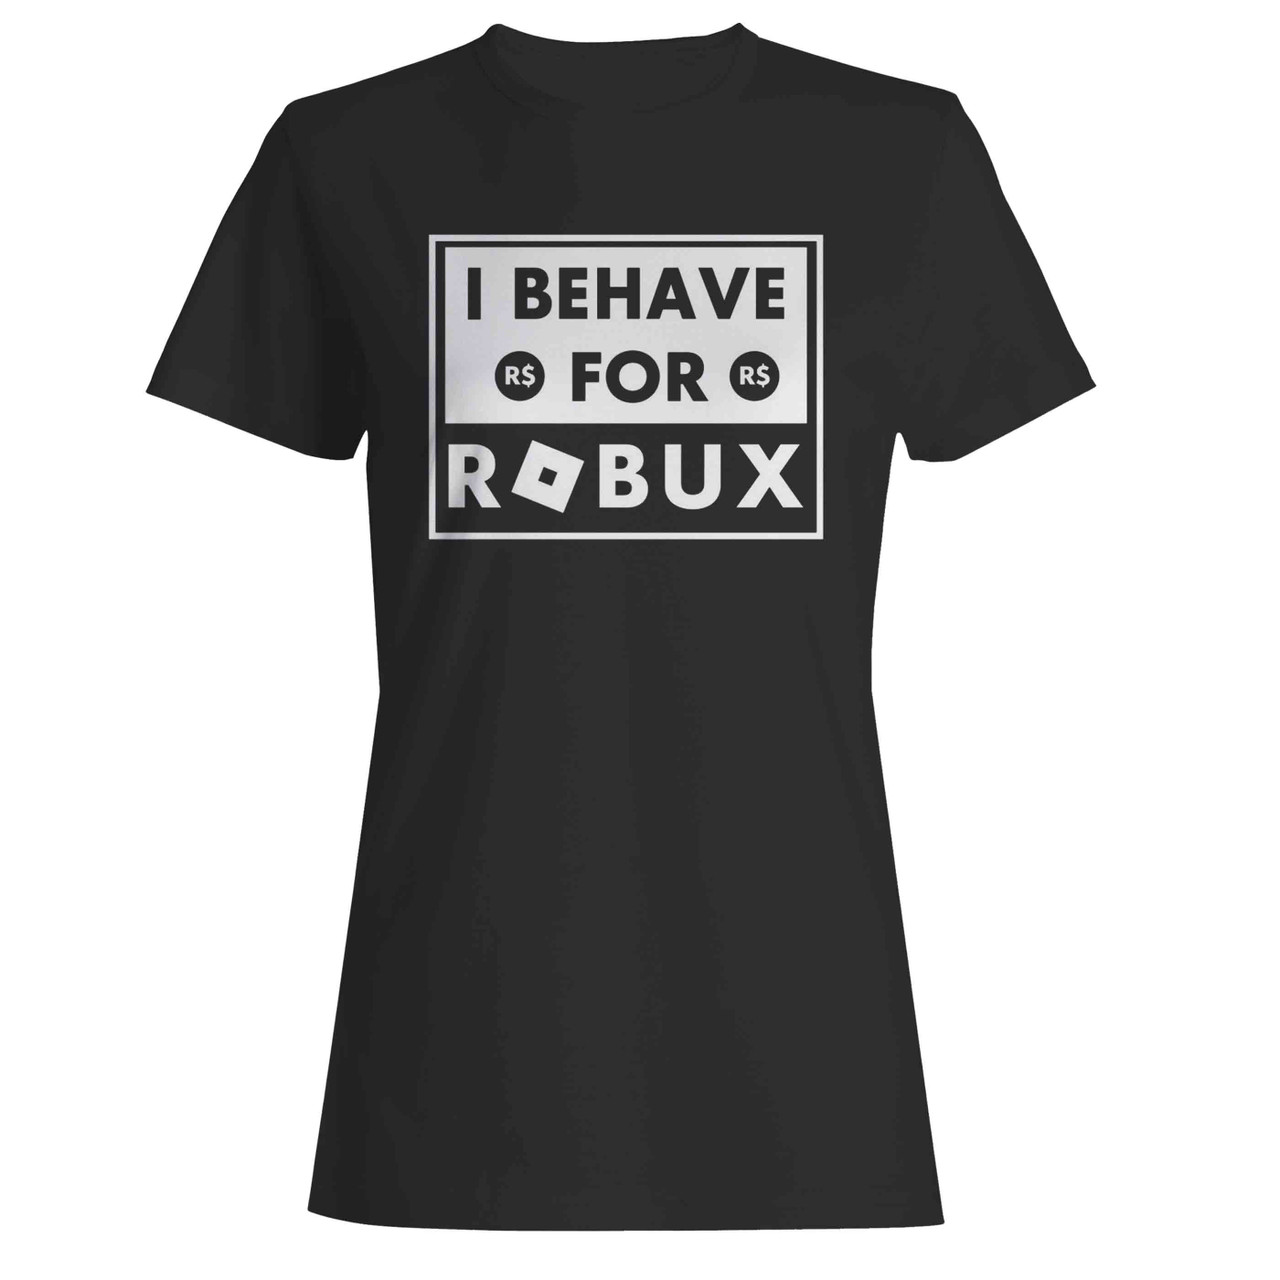 robux giver t shirt - Roblox